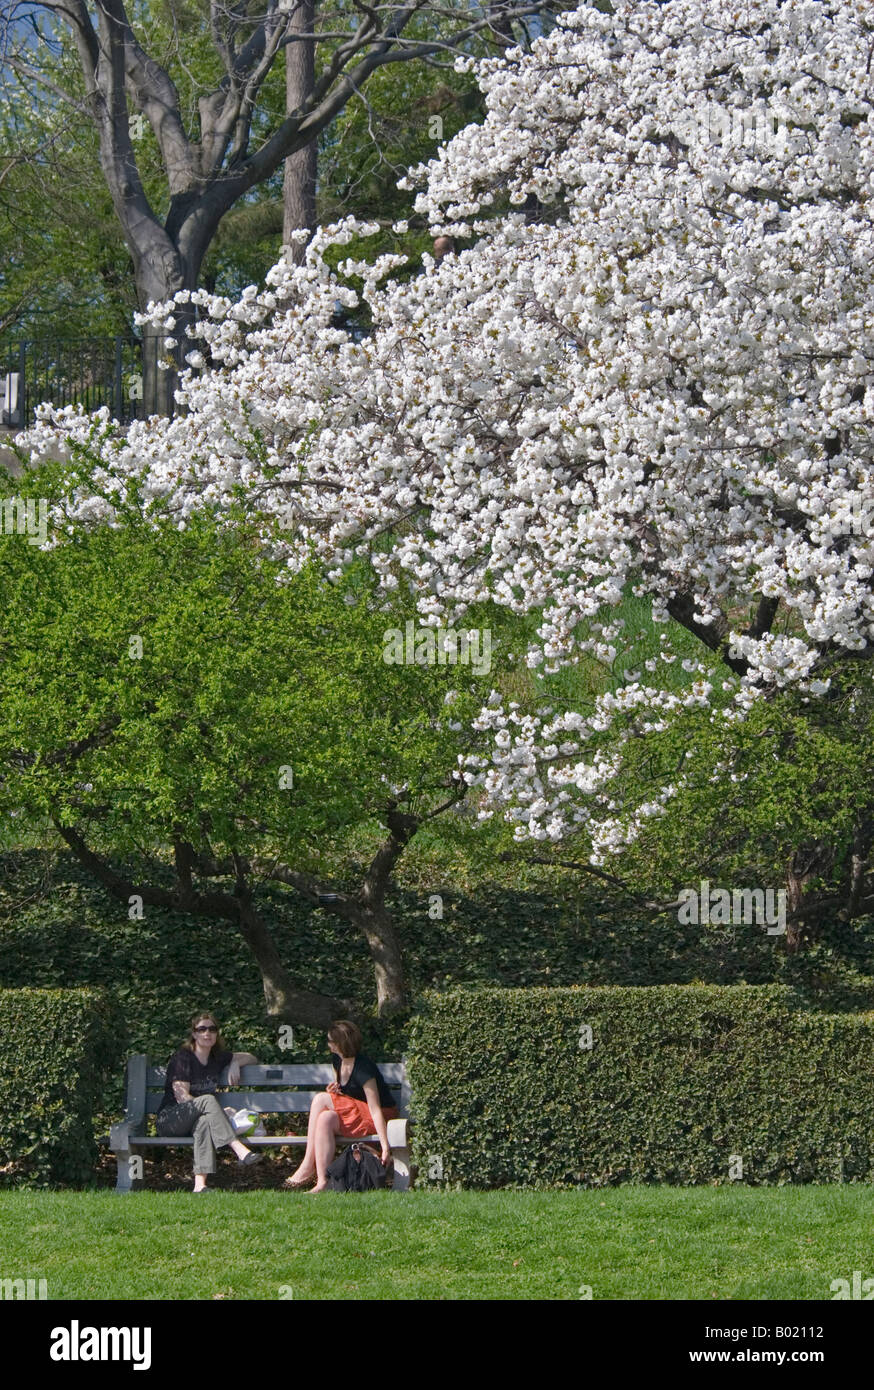 Two women in conversation at the Brooklyn Botanic Garden under Cherry Blossoms Stock Photo